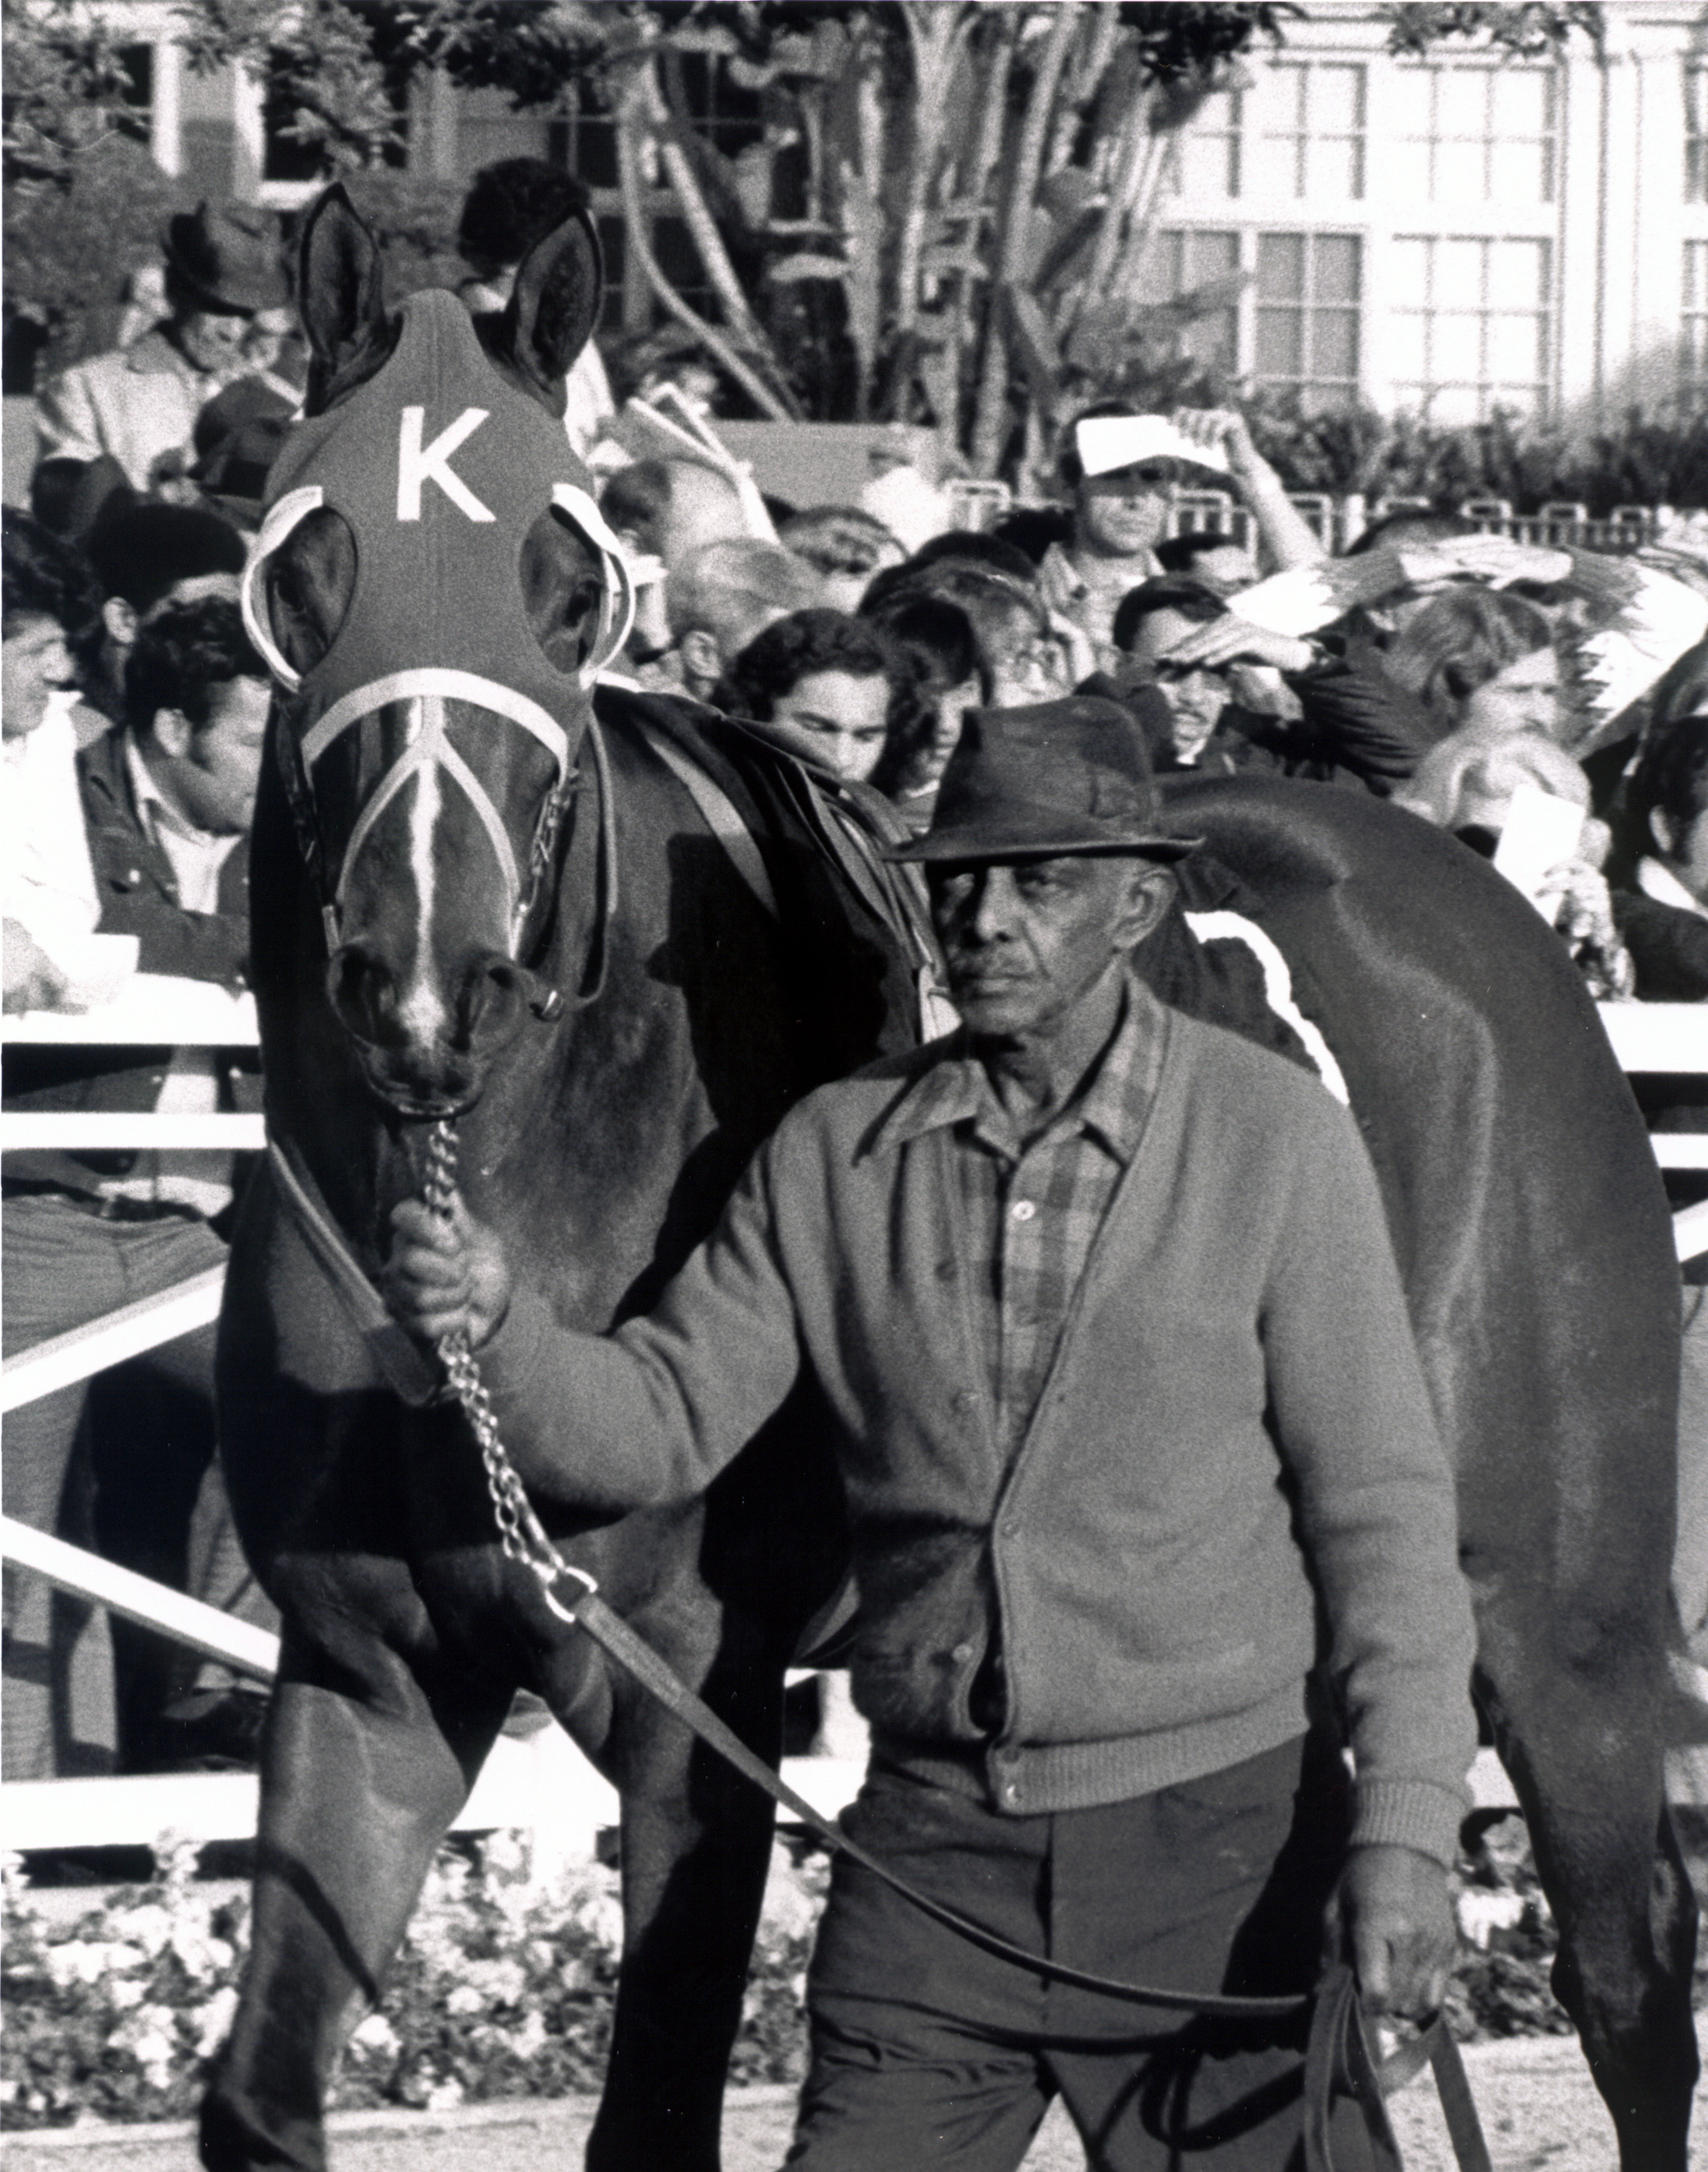 Ancient Title in the Santa Anita paddock (Bill Mochon/Museum Collection)